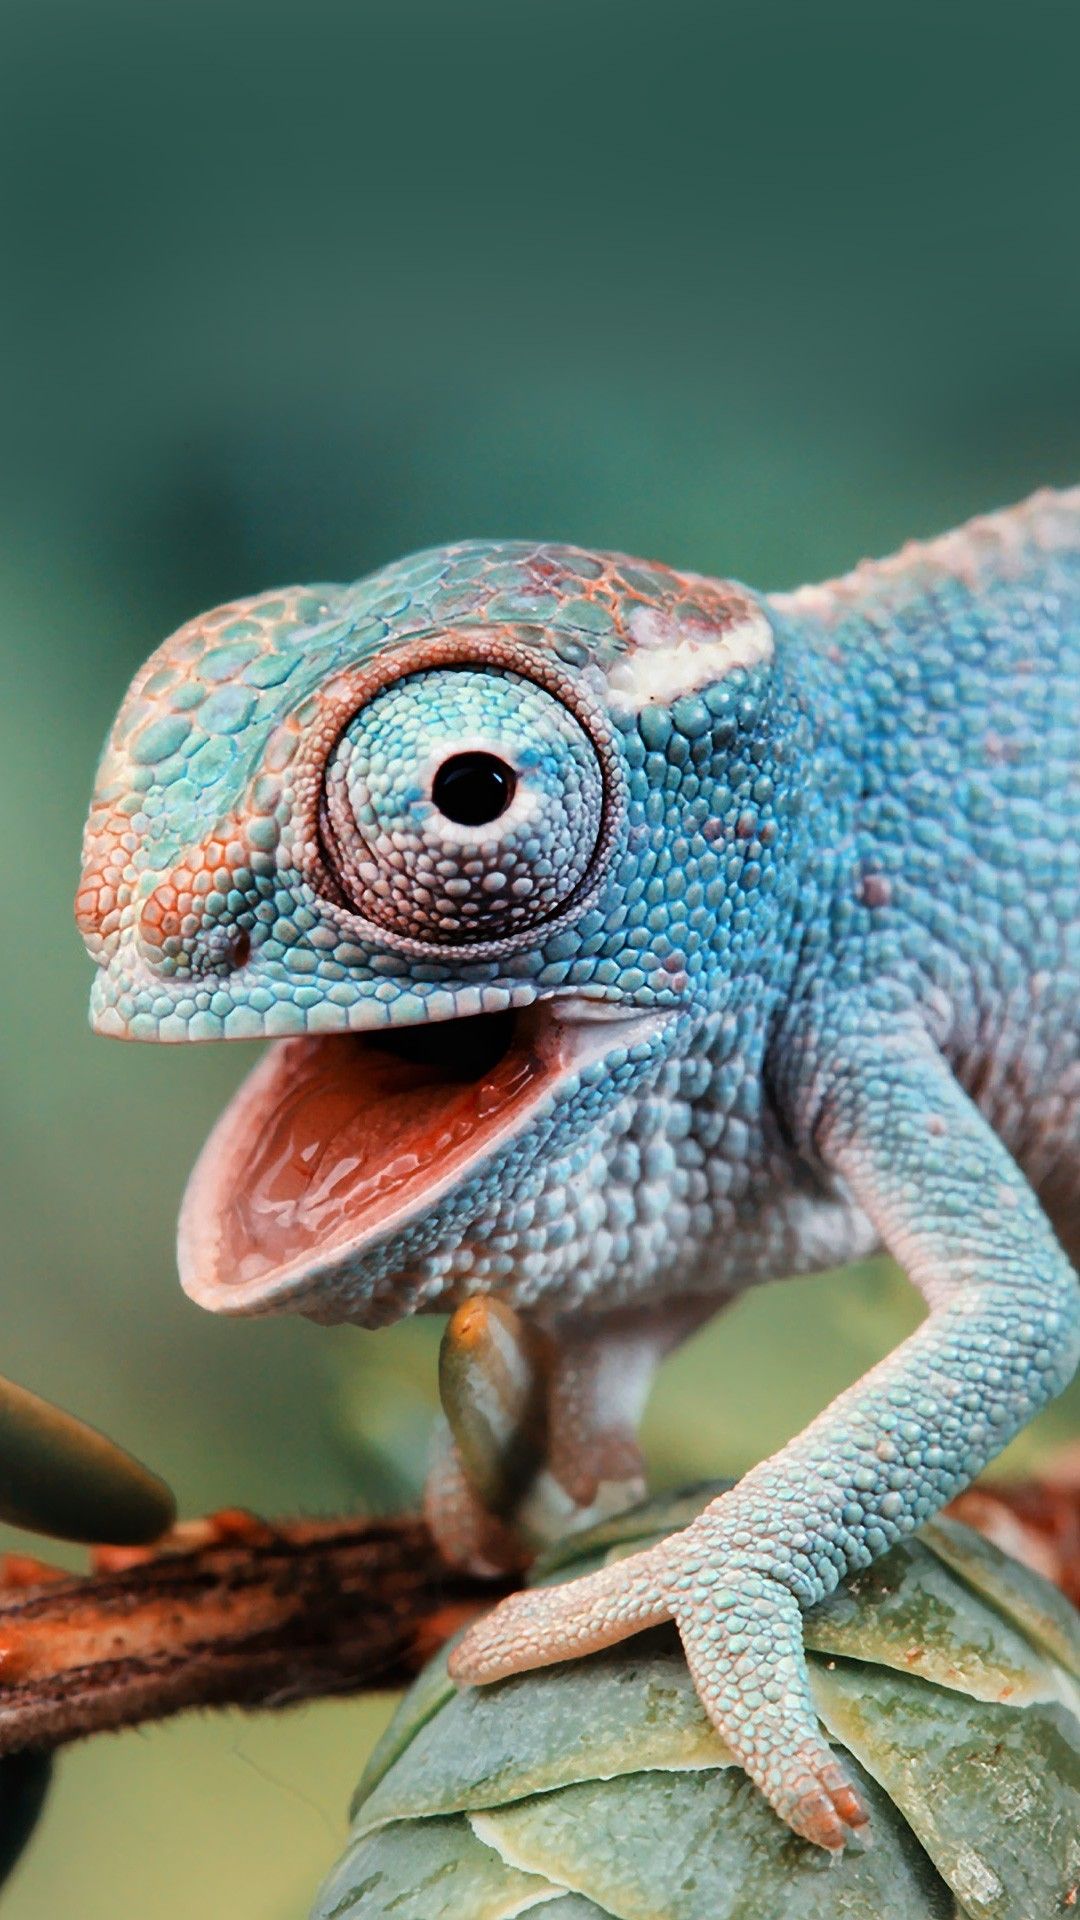 Cute chameleon htc one wallpaper, free and easy to download